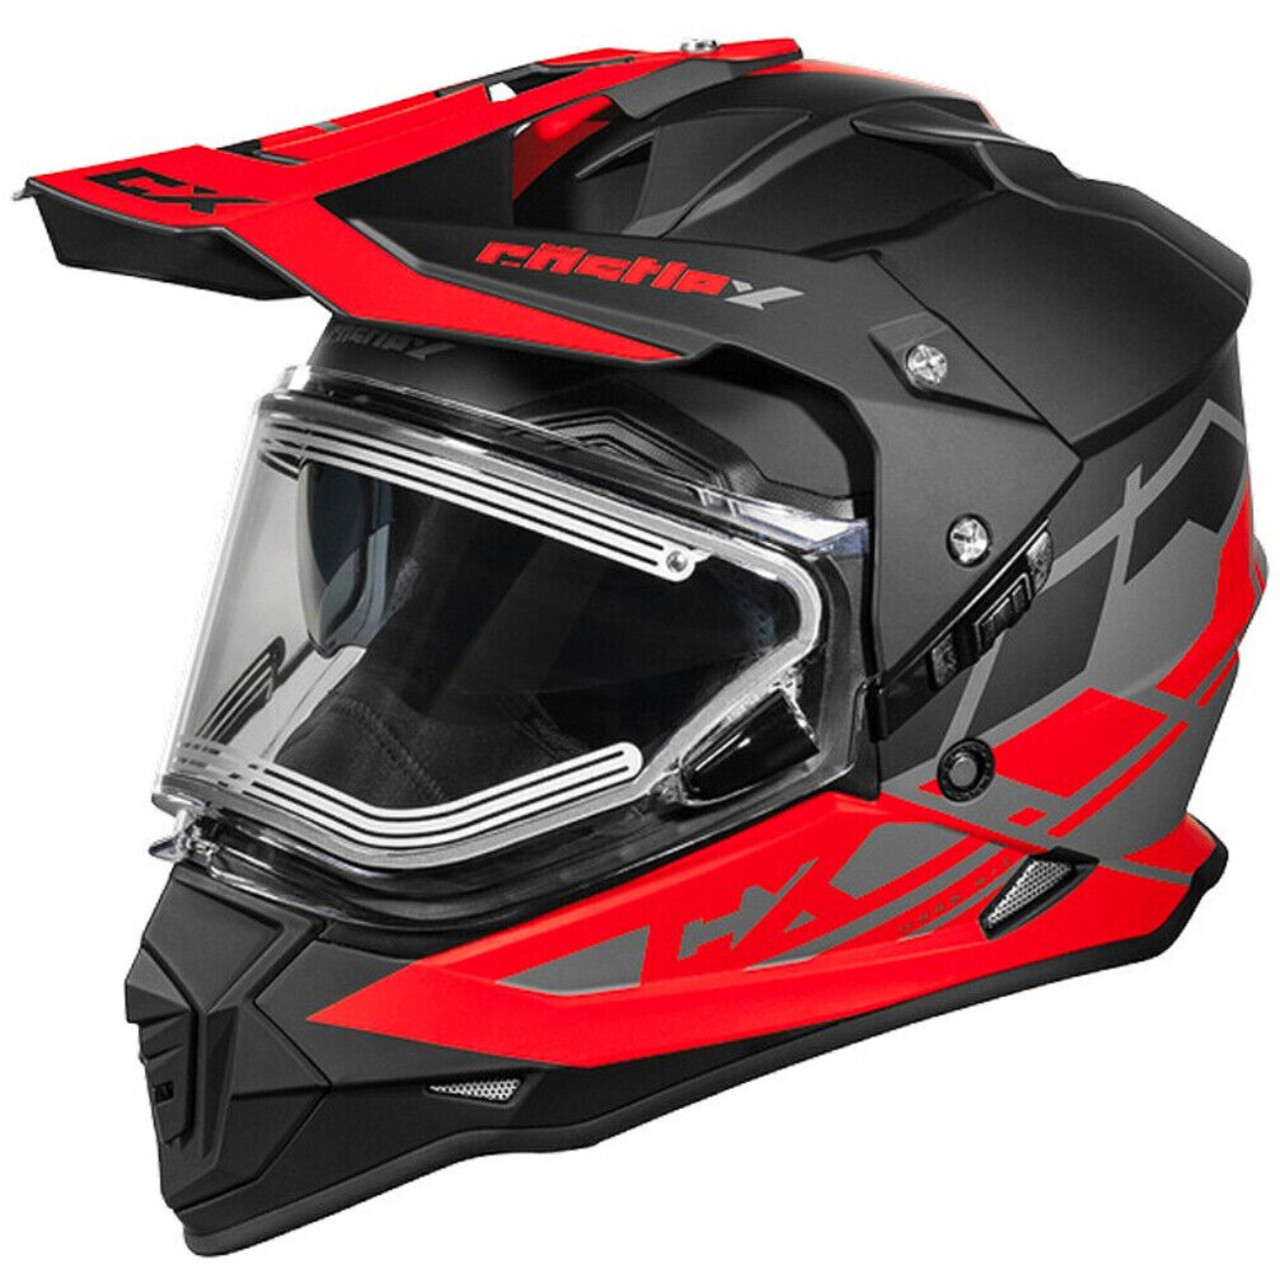 Castle X New Red Mode SV Trance Helmet With Electric Shield, 35-23916